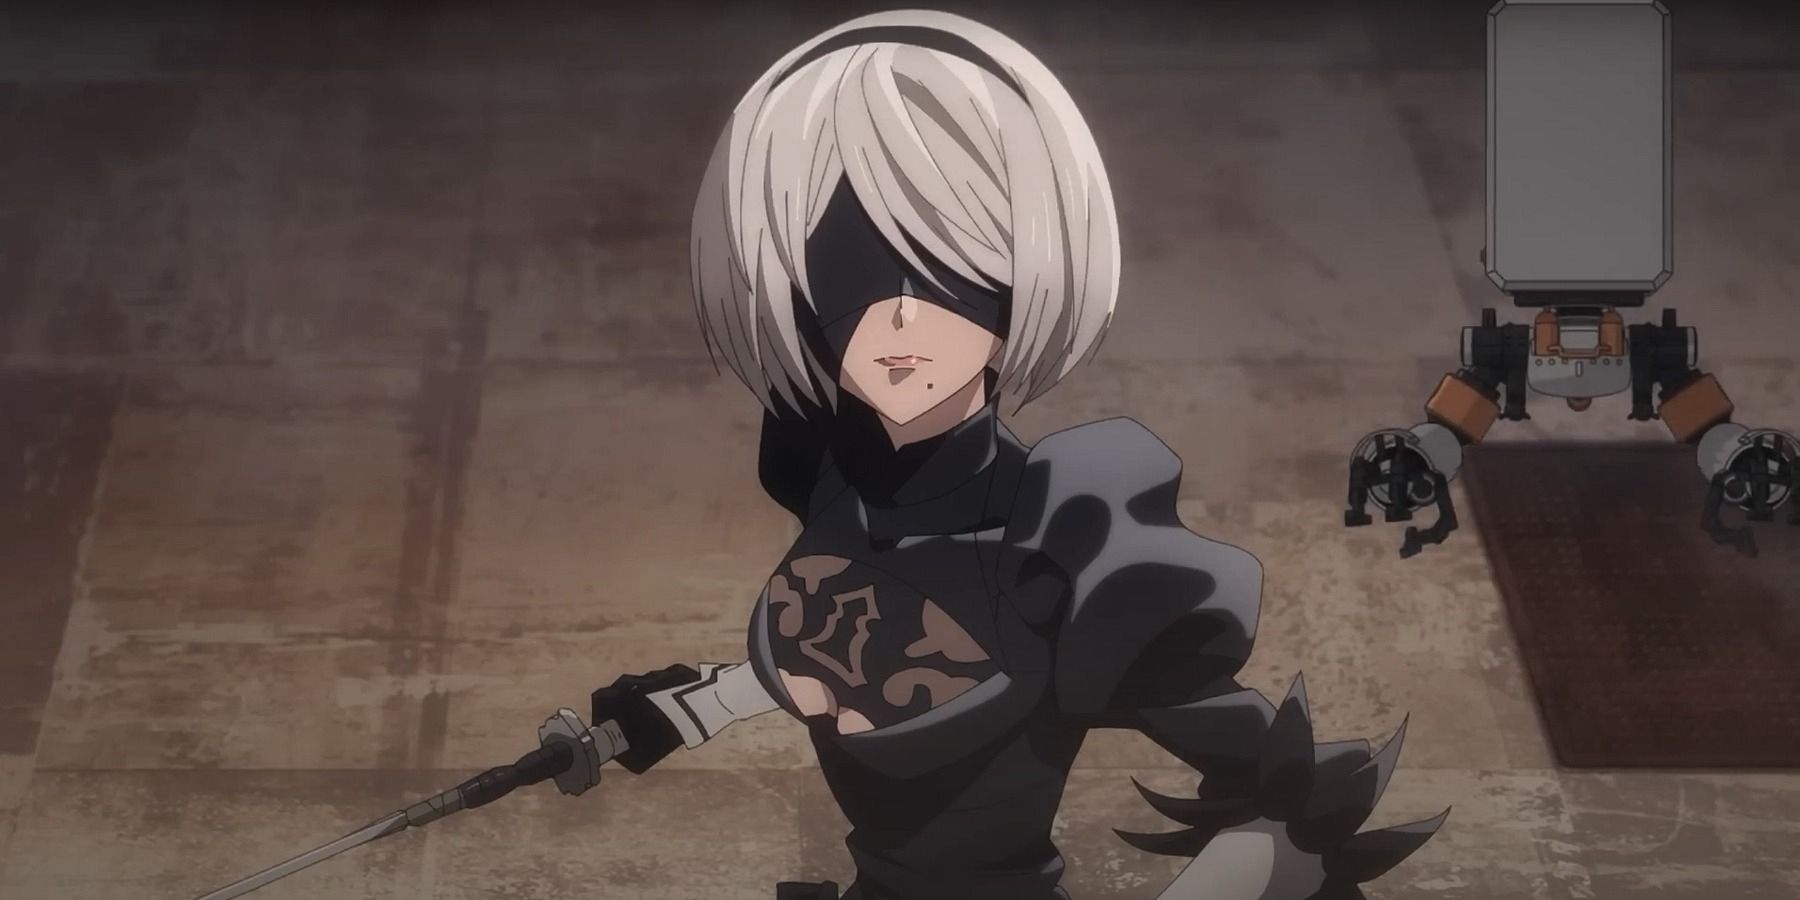 2B with Pod 042 bot in NieR Automata trailer